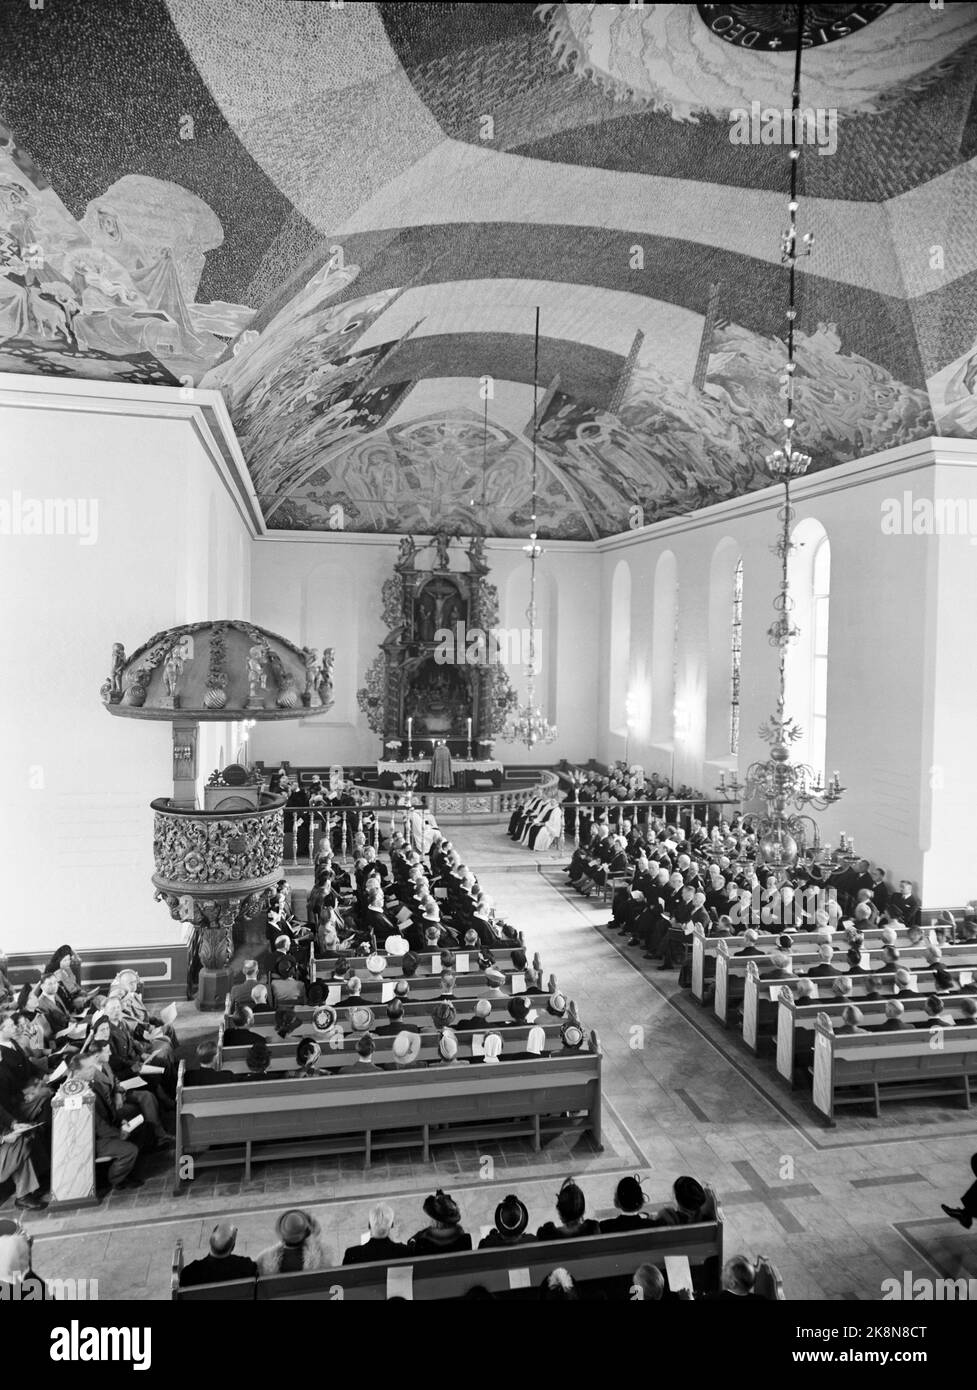 Oslo 19500514. Oslo city 900th anniversary. Party service and inauguration of the newly stated cathedral along with the Crown Prince family. The beautiful altarpiece and pulpit in Baroque returned to the church for the party service. For the first time, the congregation could admire Hugo Lous Mohr's brilliant roof paintings. Photo: Sverre A Børretzen / Arne Kjus / Current / NTB Stock Photo